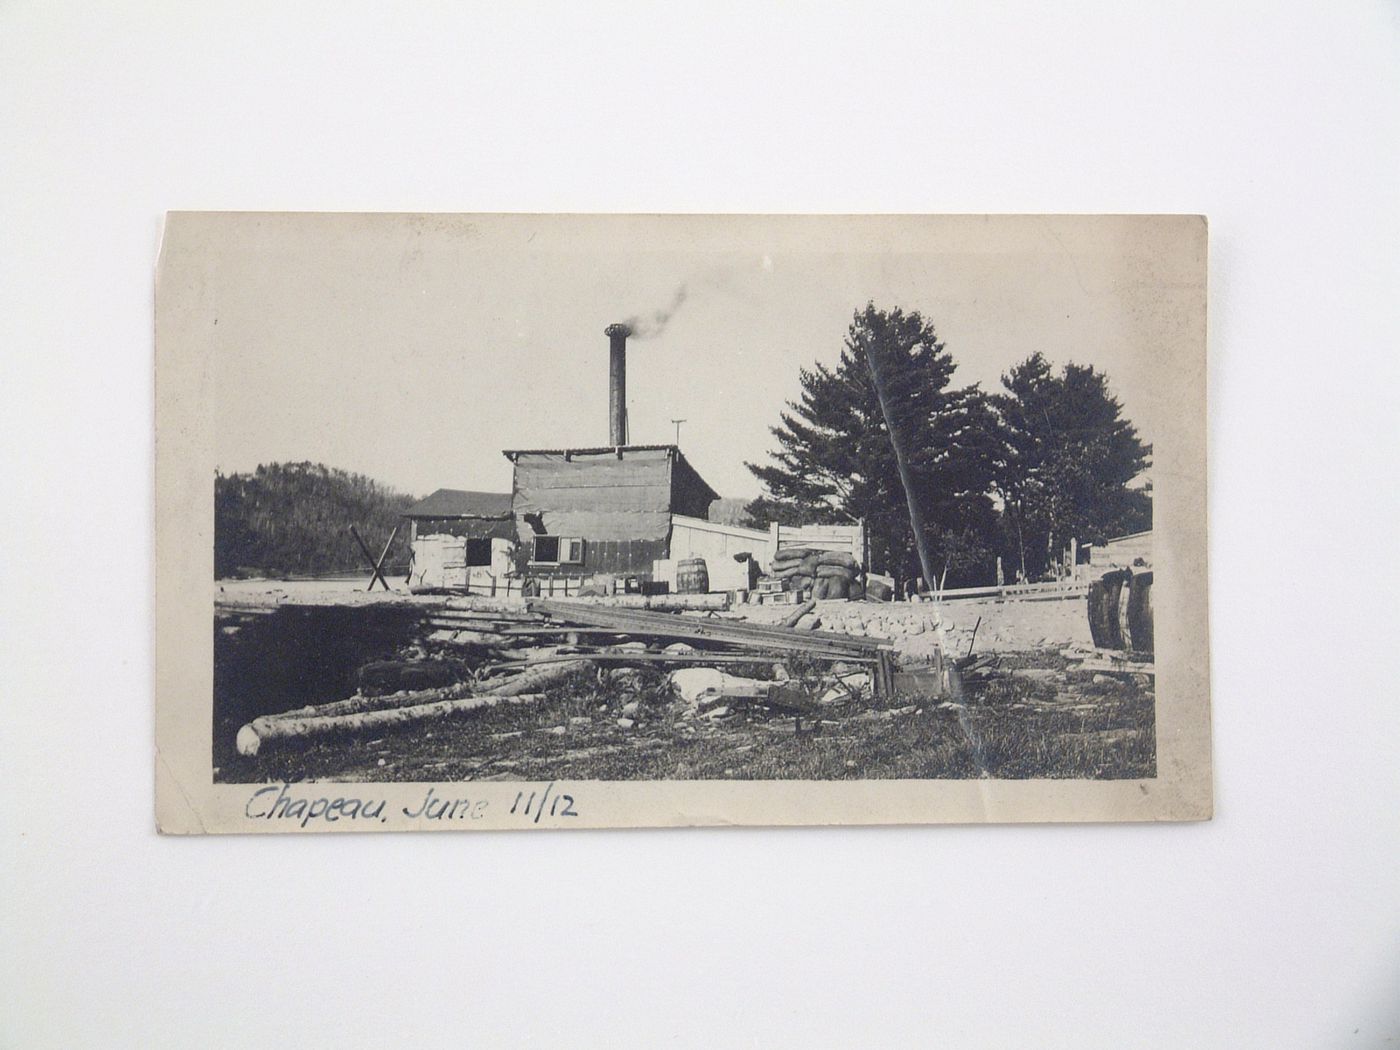 View of construction materials at the back of industrial workshop with chimney, Chapeau, Québec, Canada